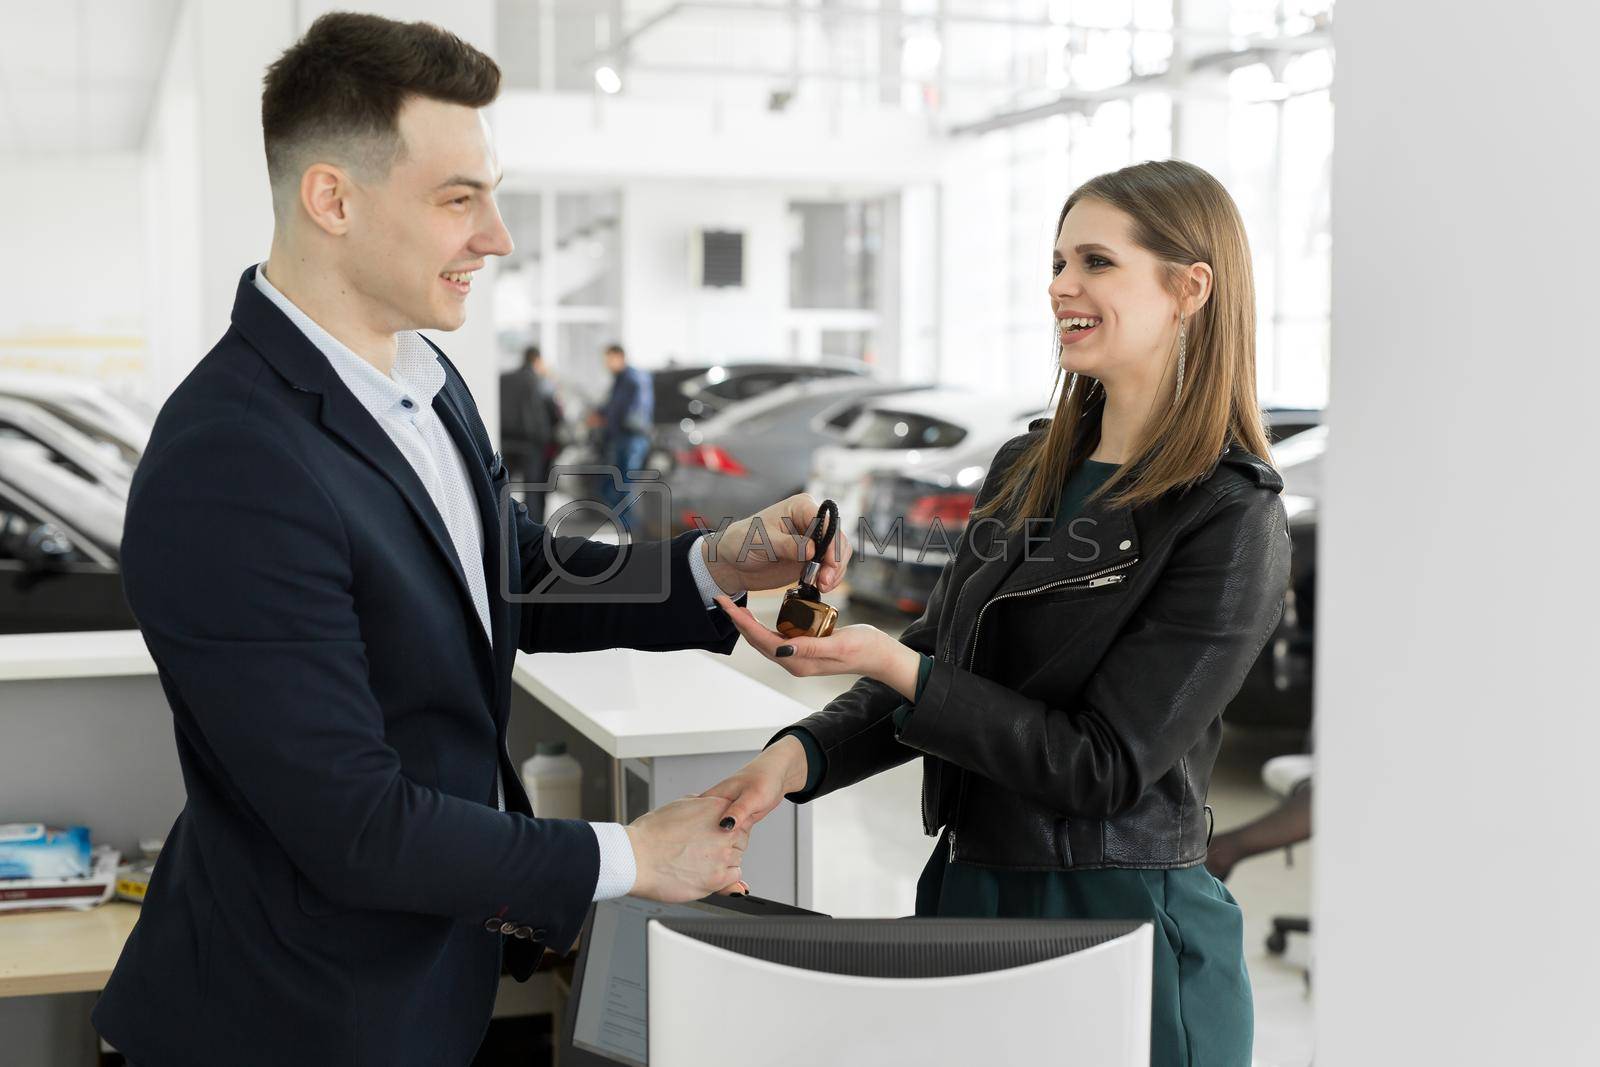 Royalty free image of Car rental and Insurance concept, Young salesman receiving money and giving car's key to customer after sign agreement contract with approved good deal for rent or purchase by StudioPeace